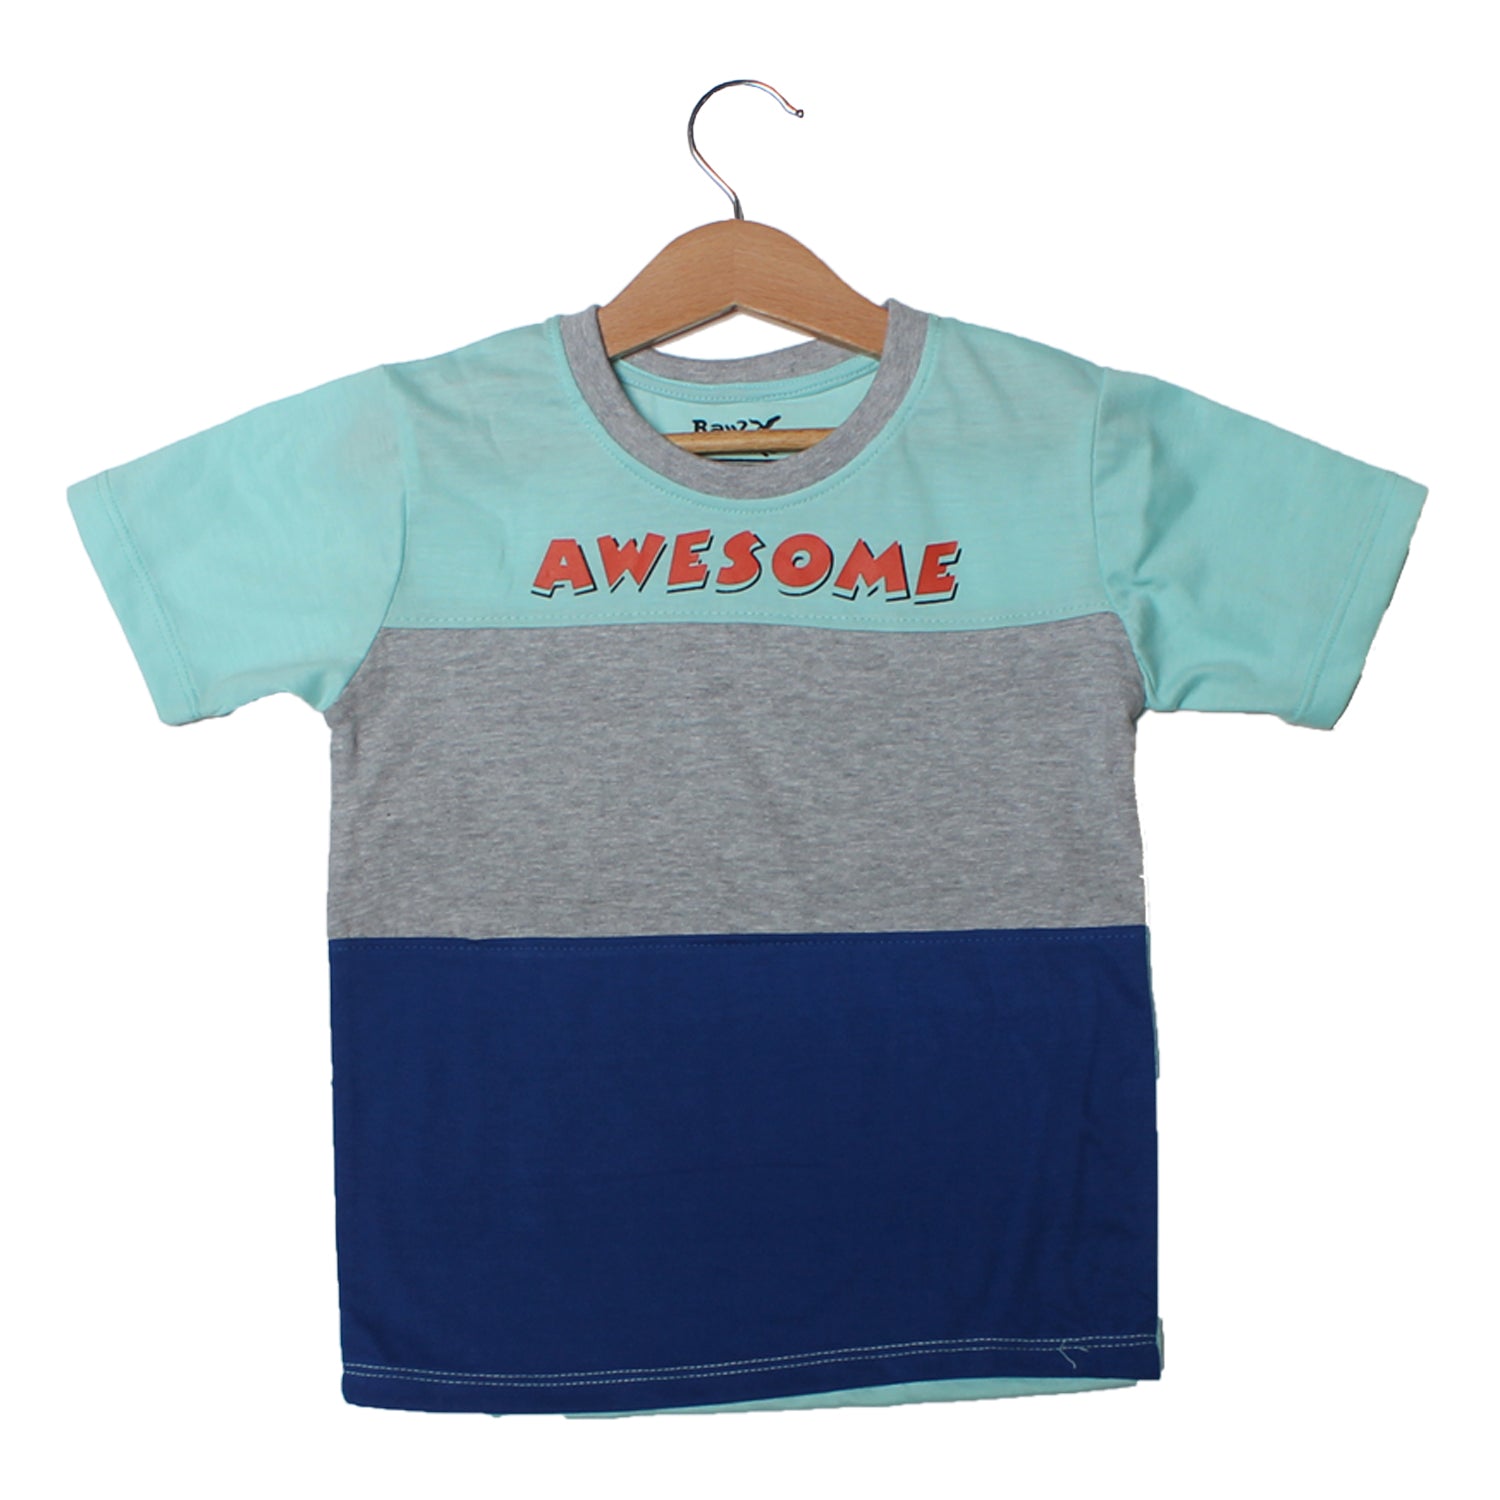 NEW SKY BLUE & GREY AWESOME PRINTED T-SHIRT